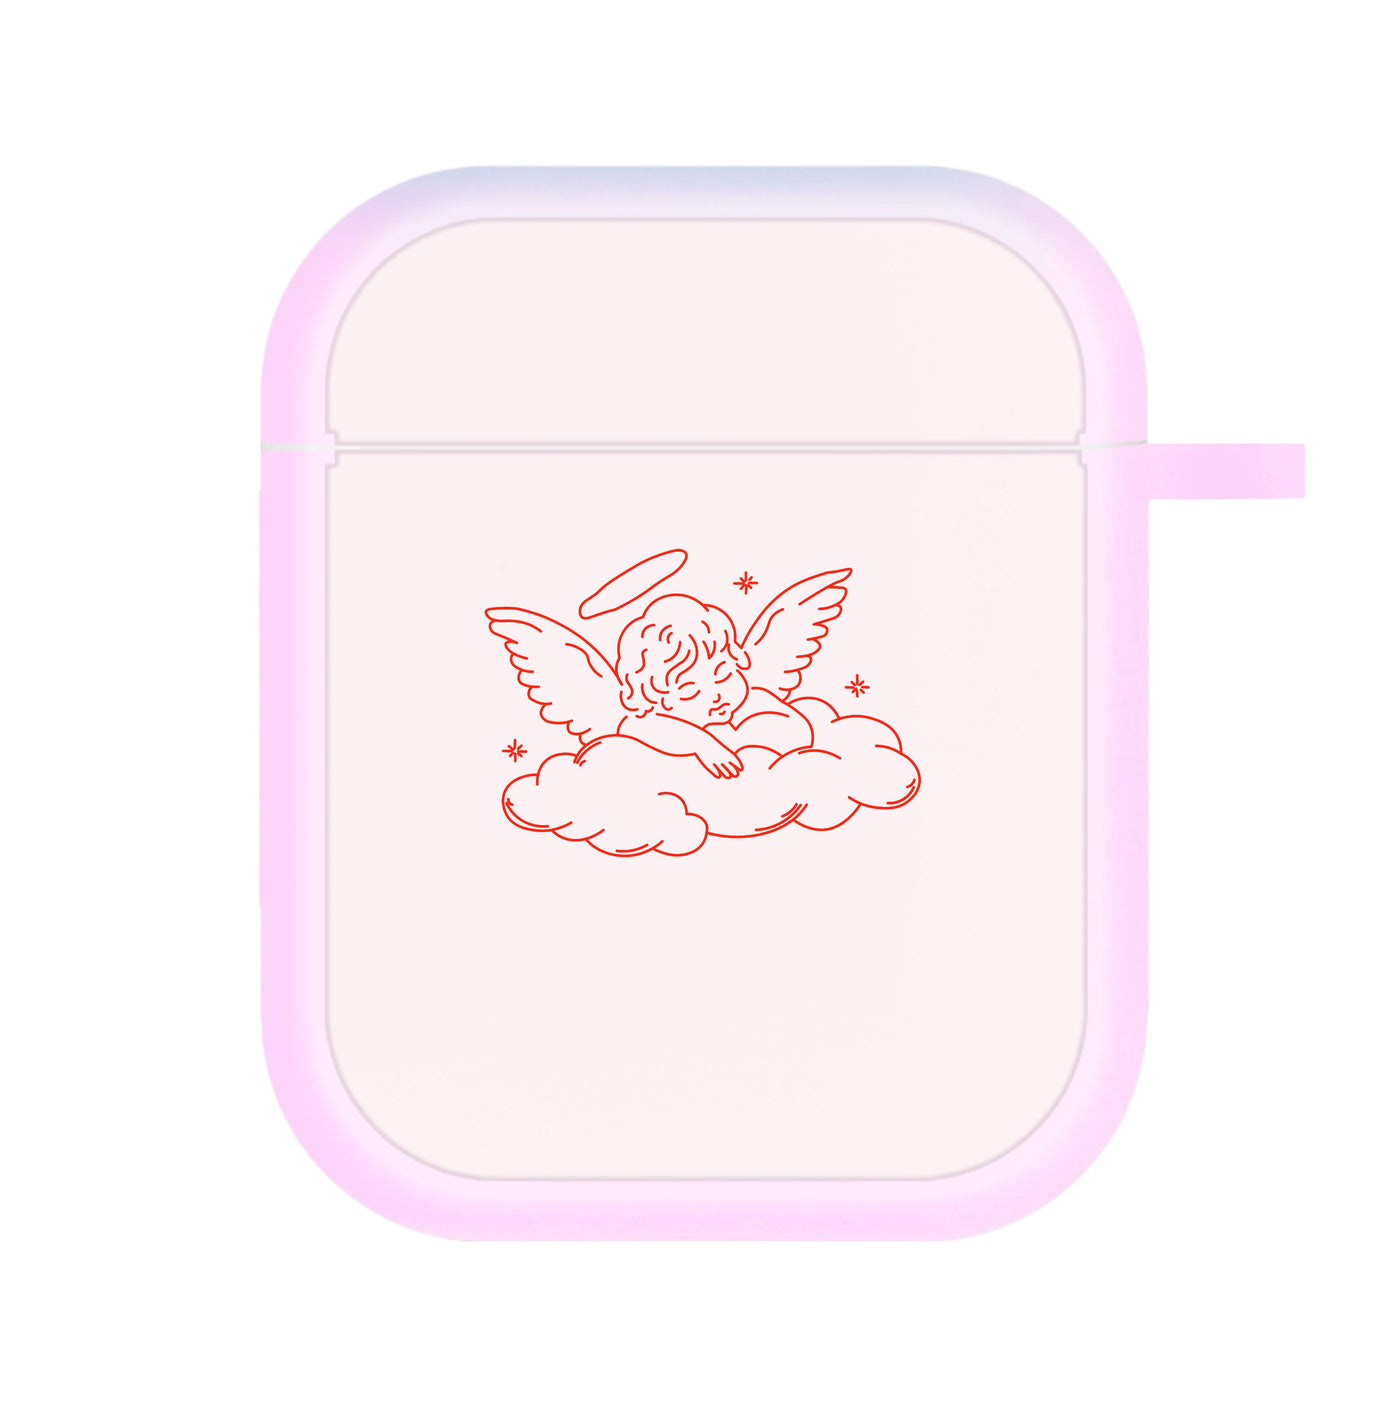 Angel - Clean Girl Aesthetic AirPods Case